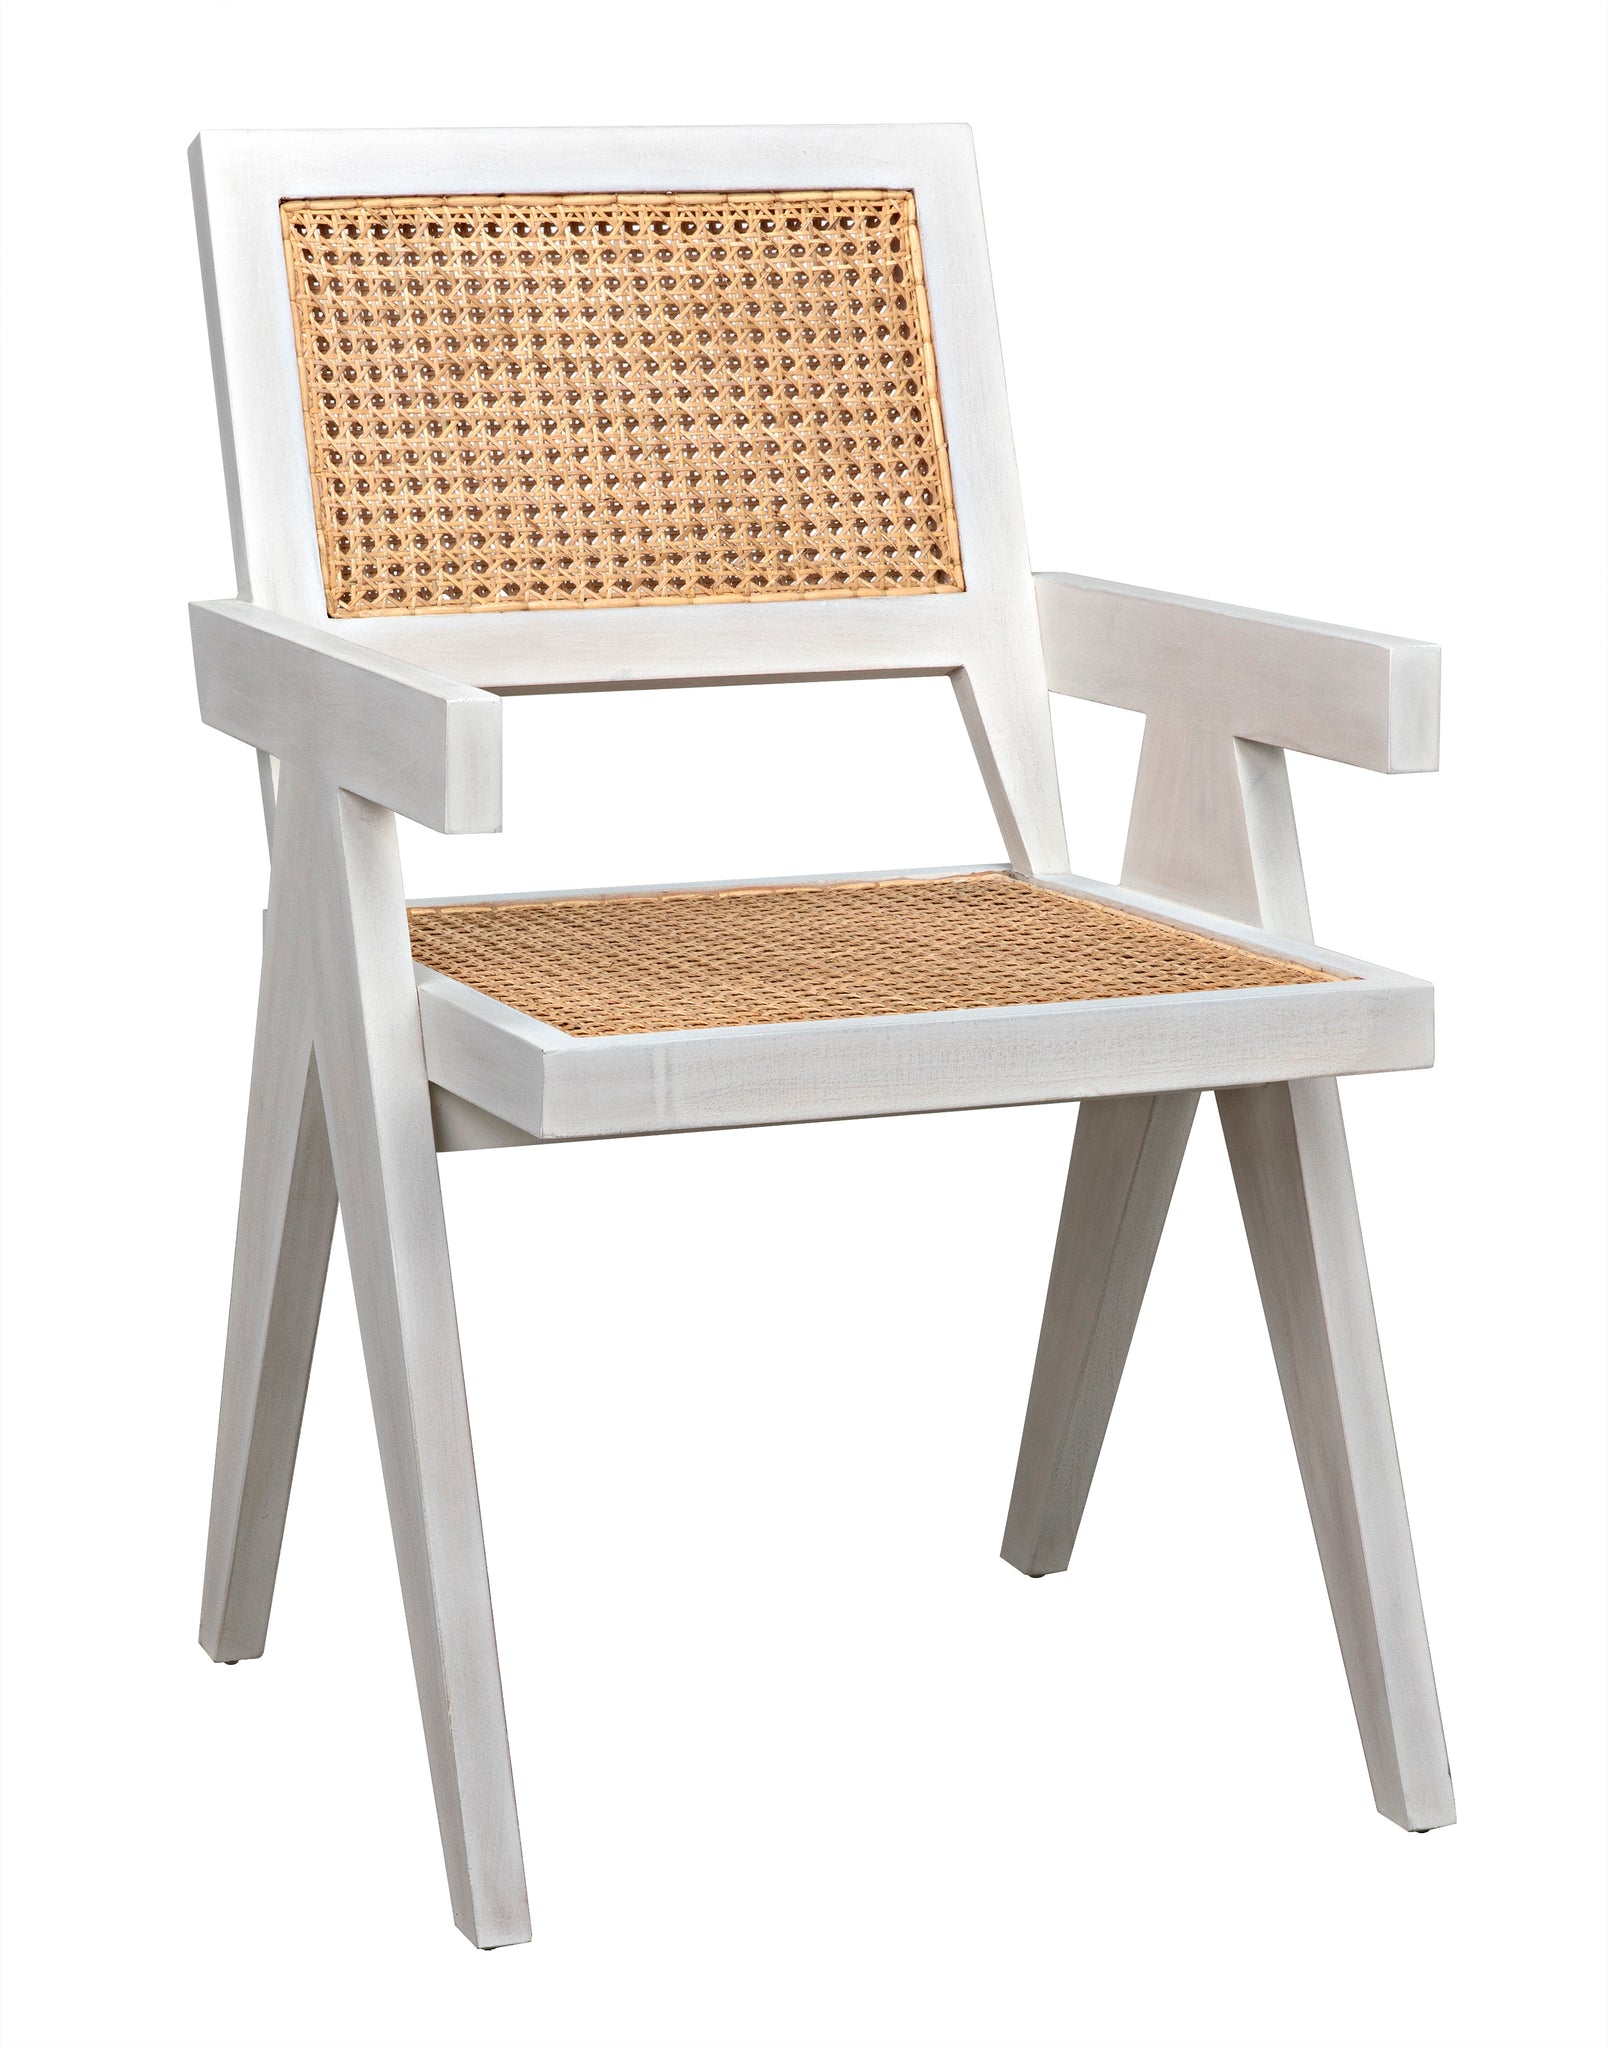 Jude Chair - 3 Colors